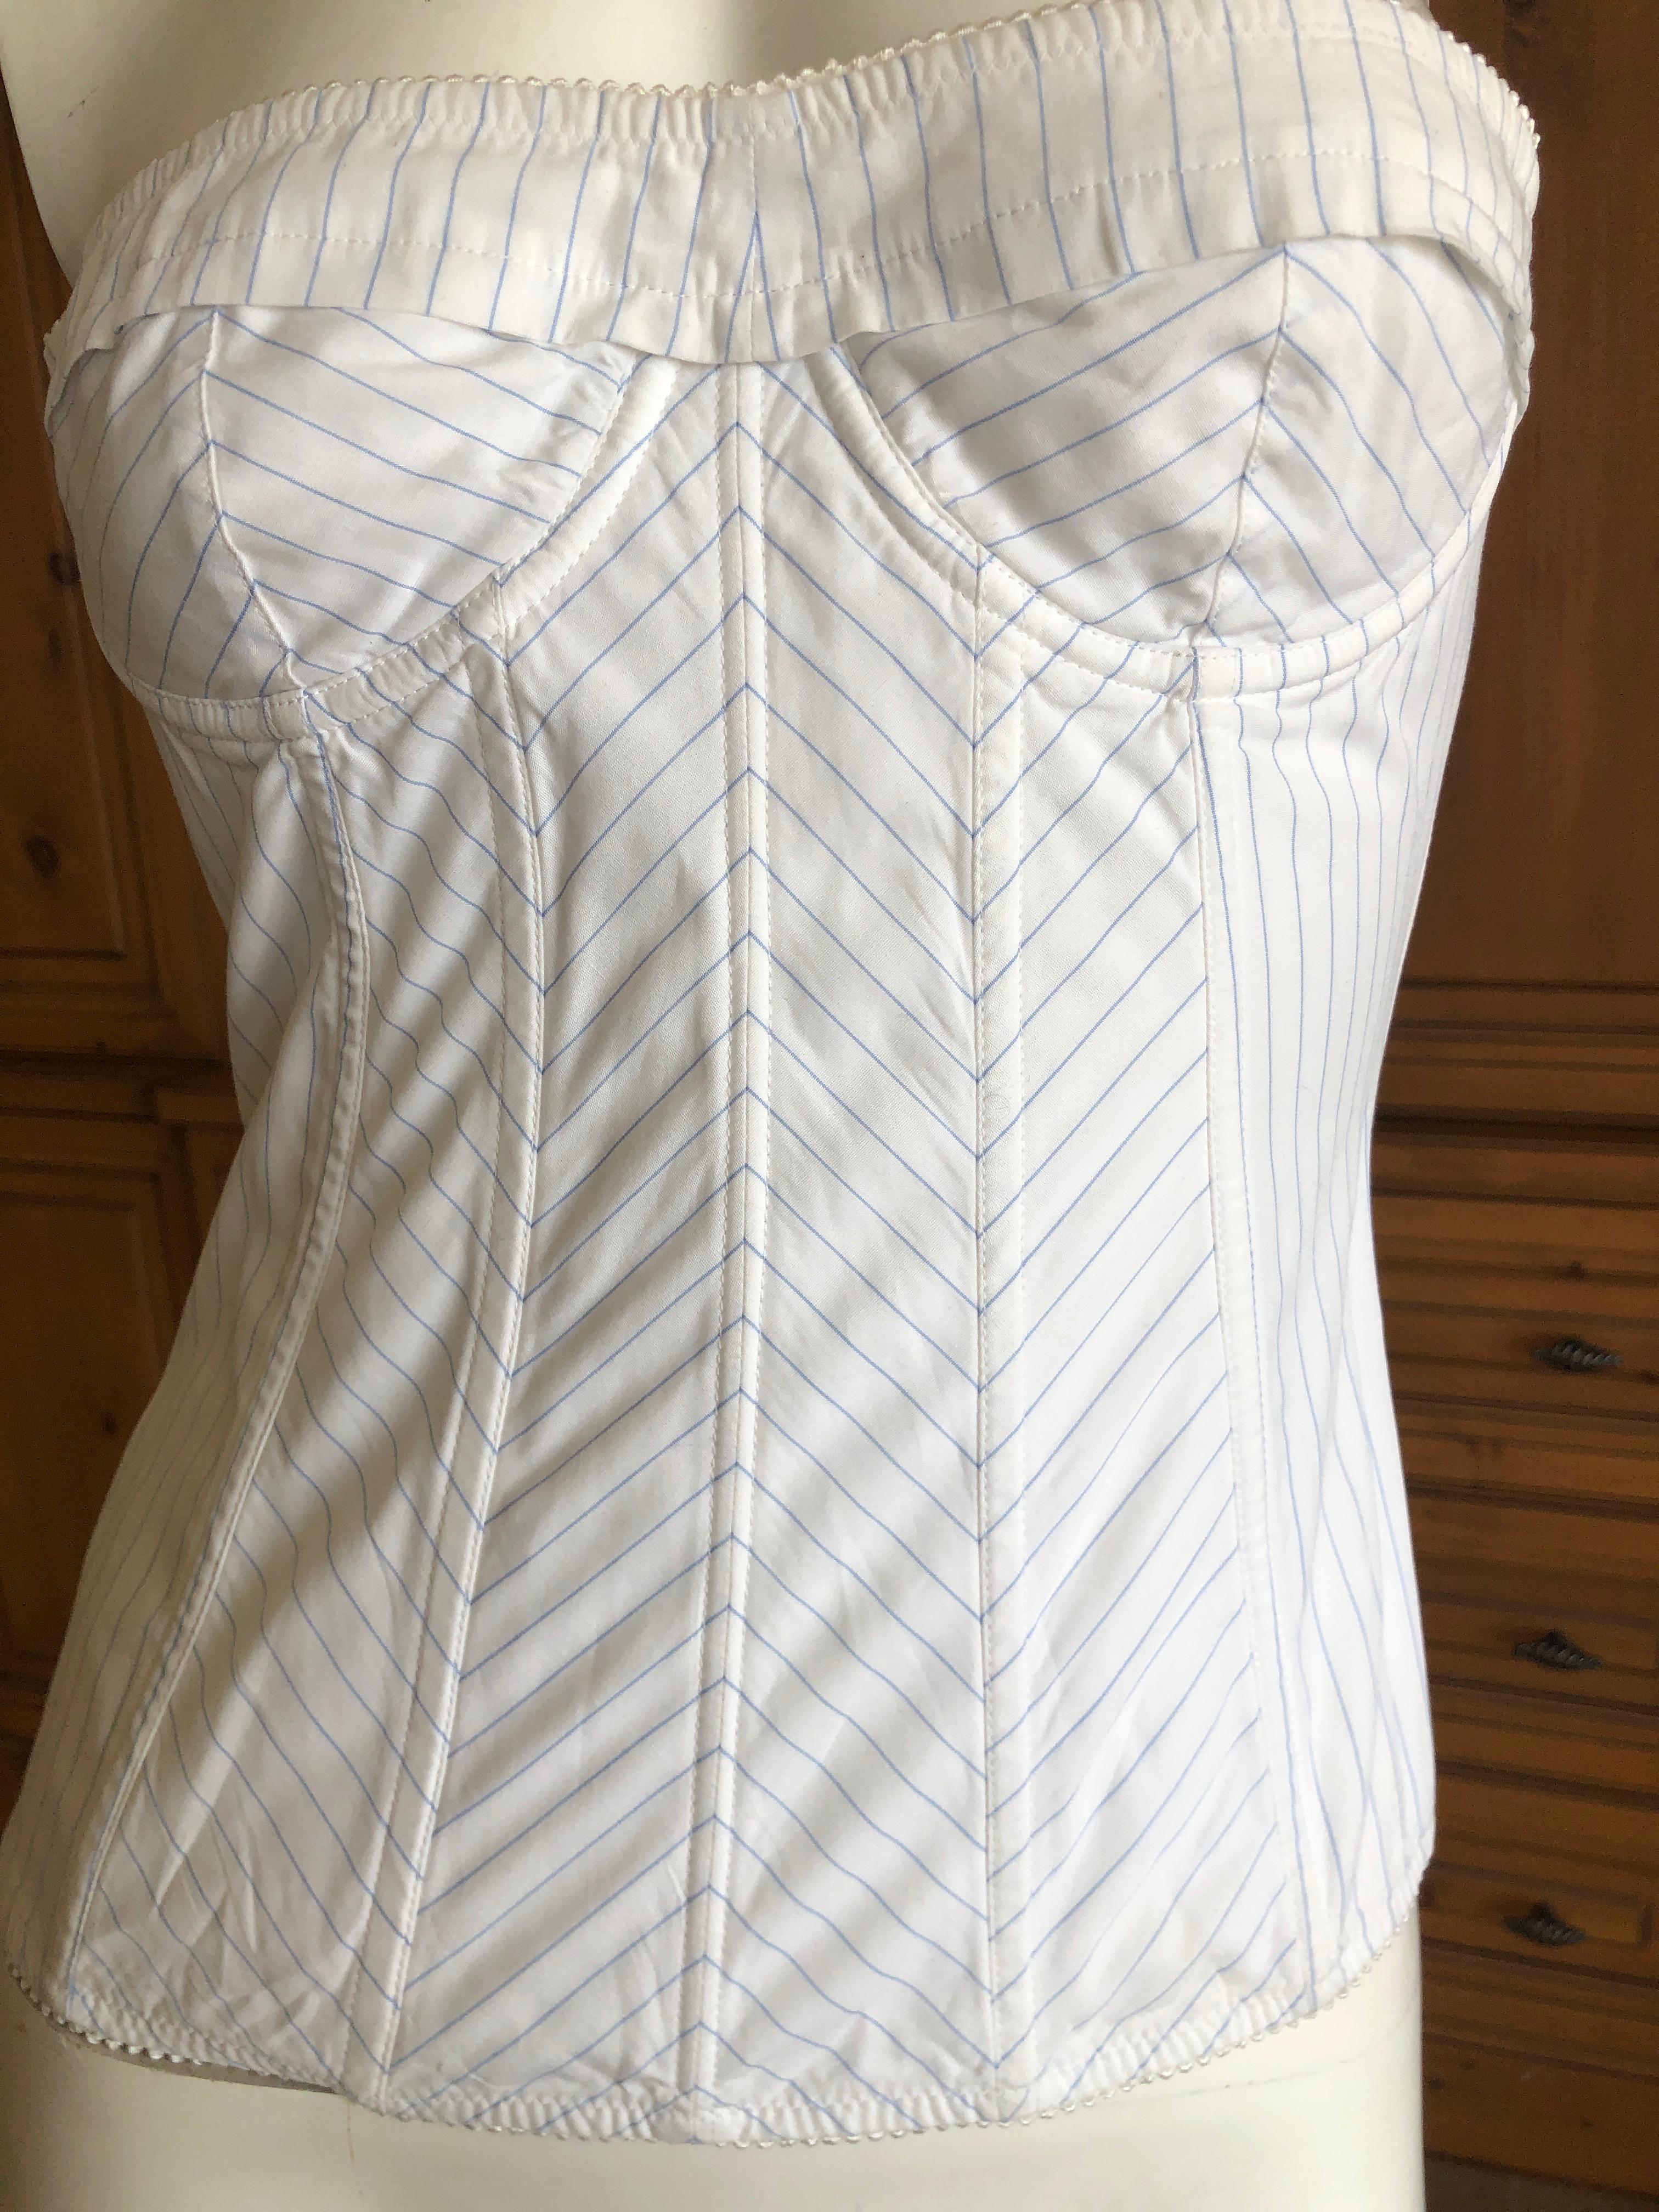 Dolce & Gabbana Vintage Striped Corset In Excellent Condition For Sale In Cloverdale, CA